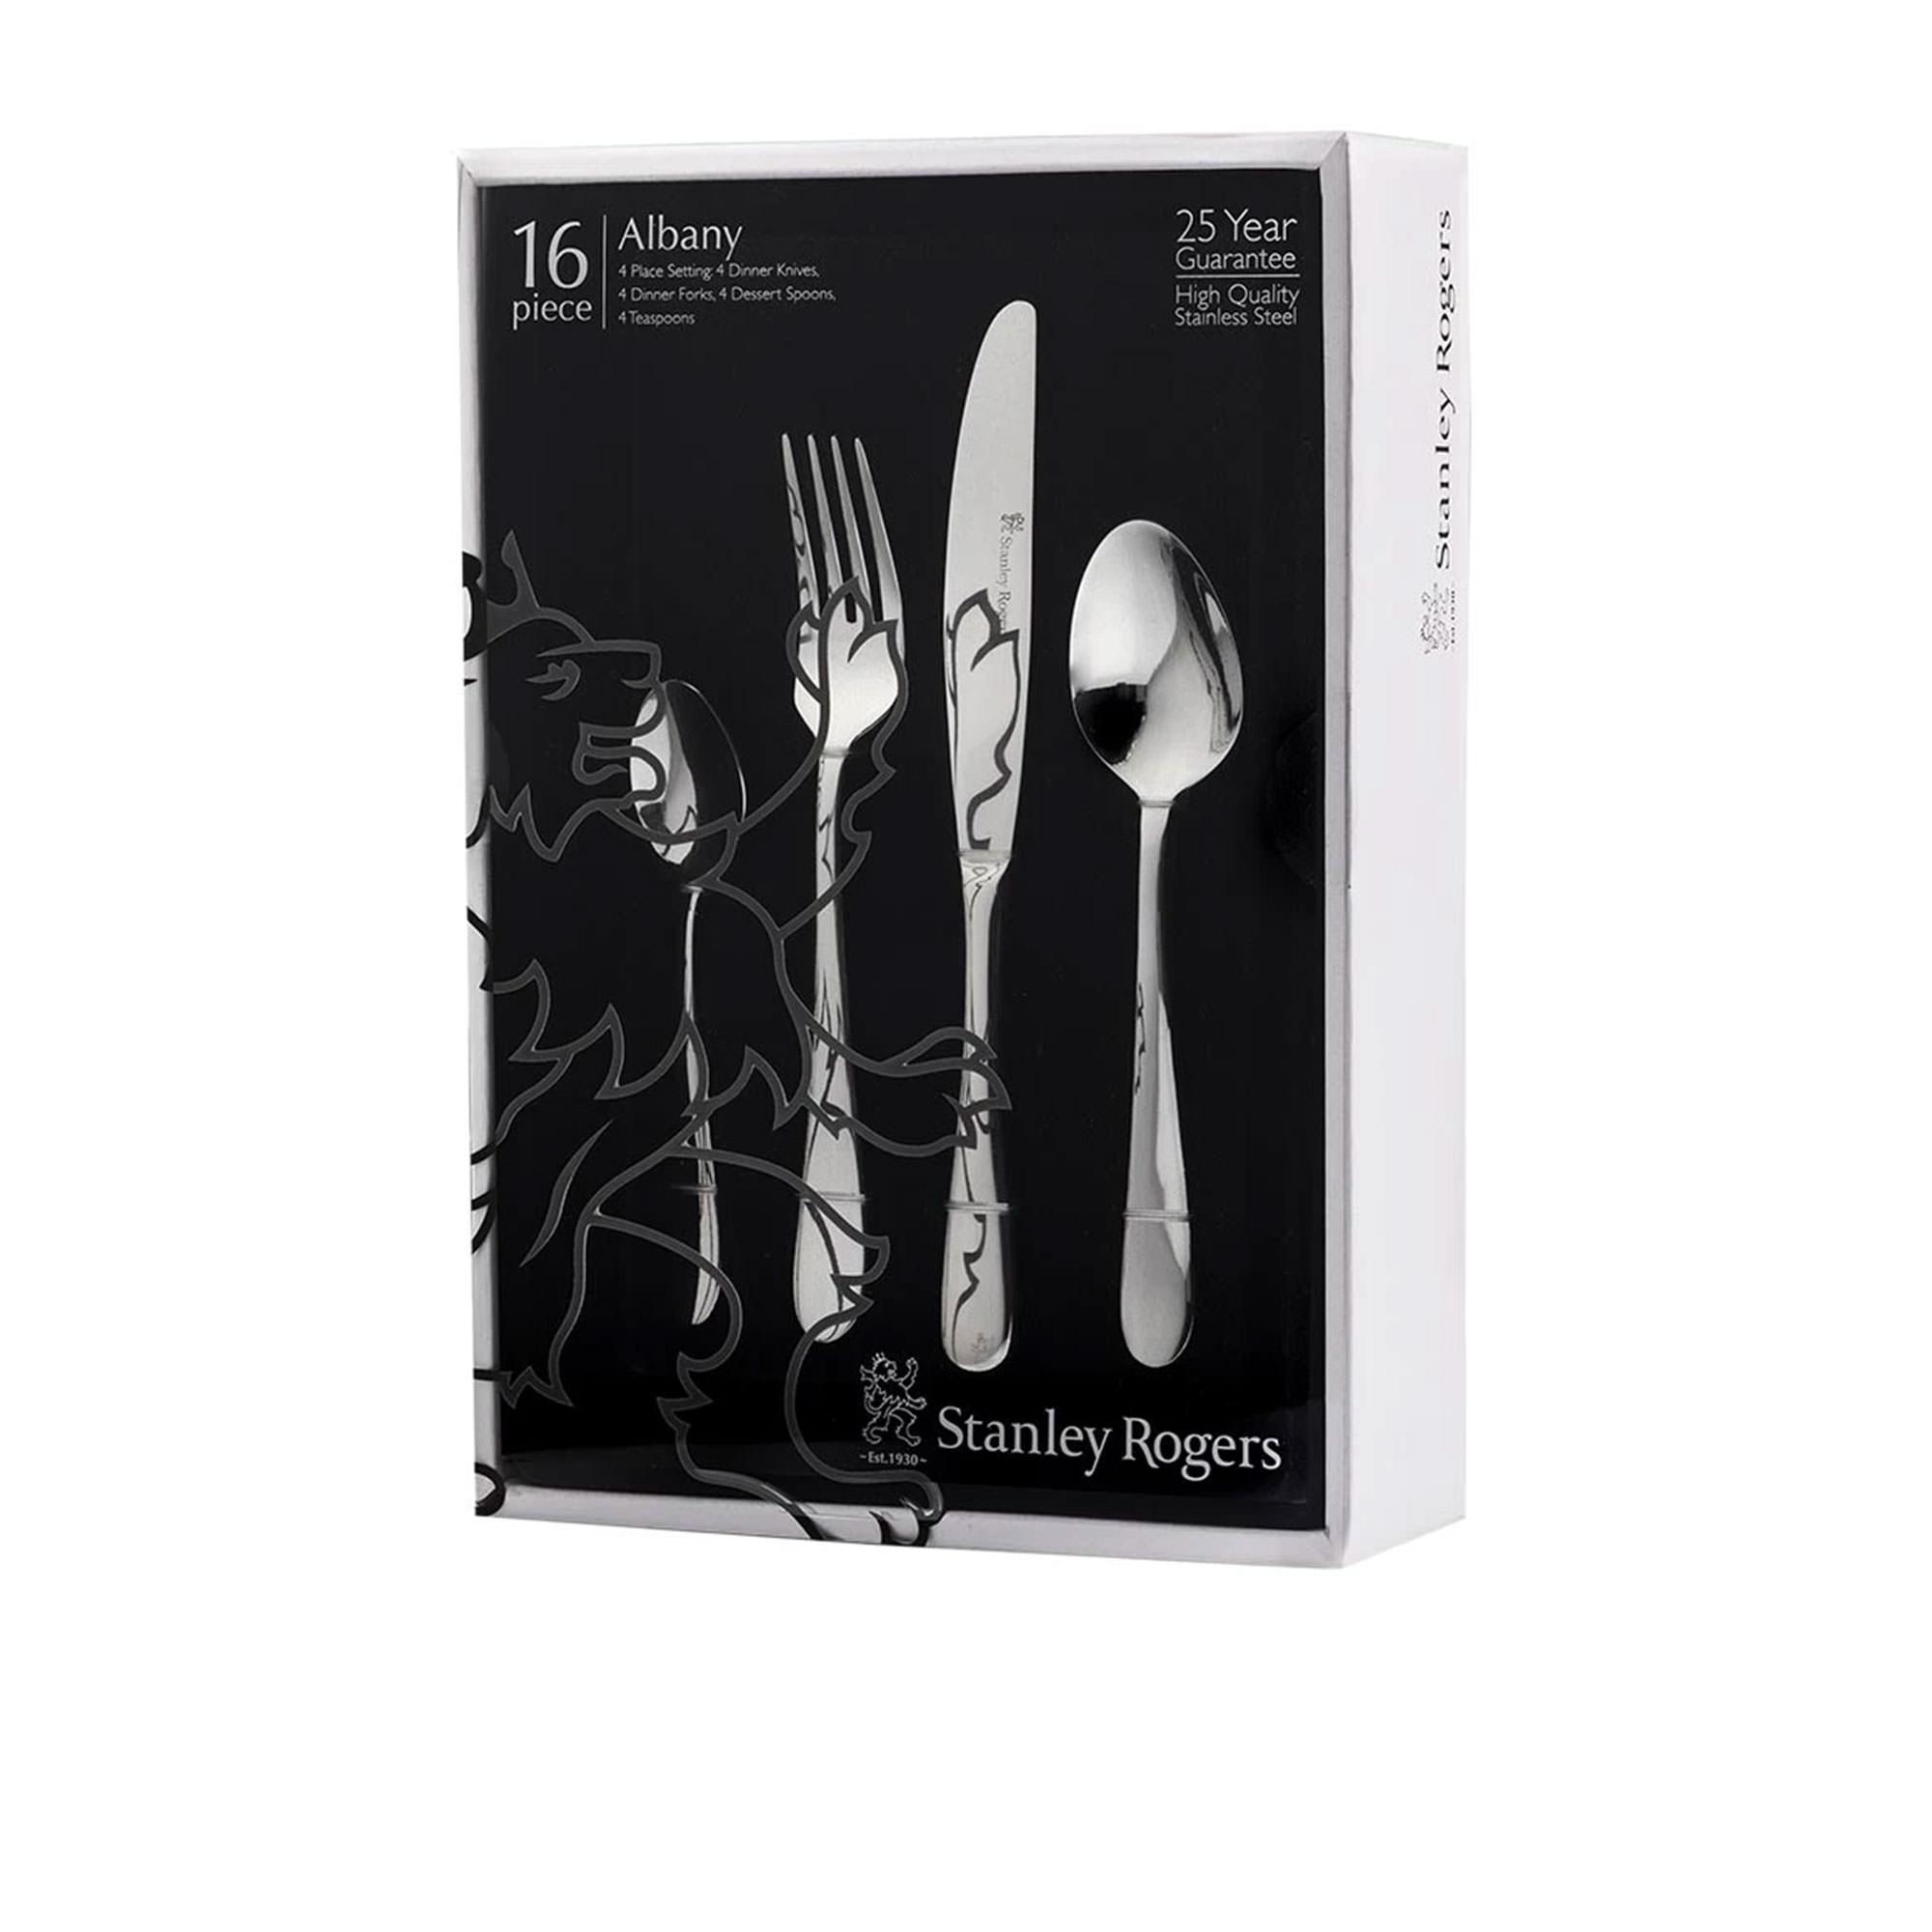 Stanley Rogers Albany Cutlery Set 16pc Stainless Steel Image 4